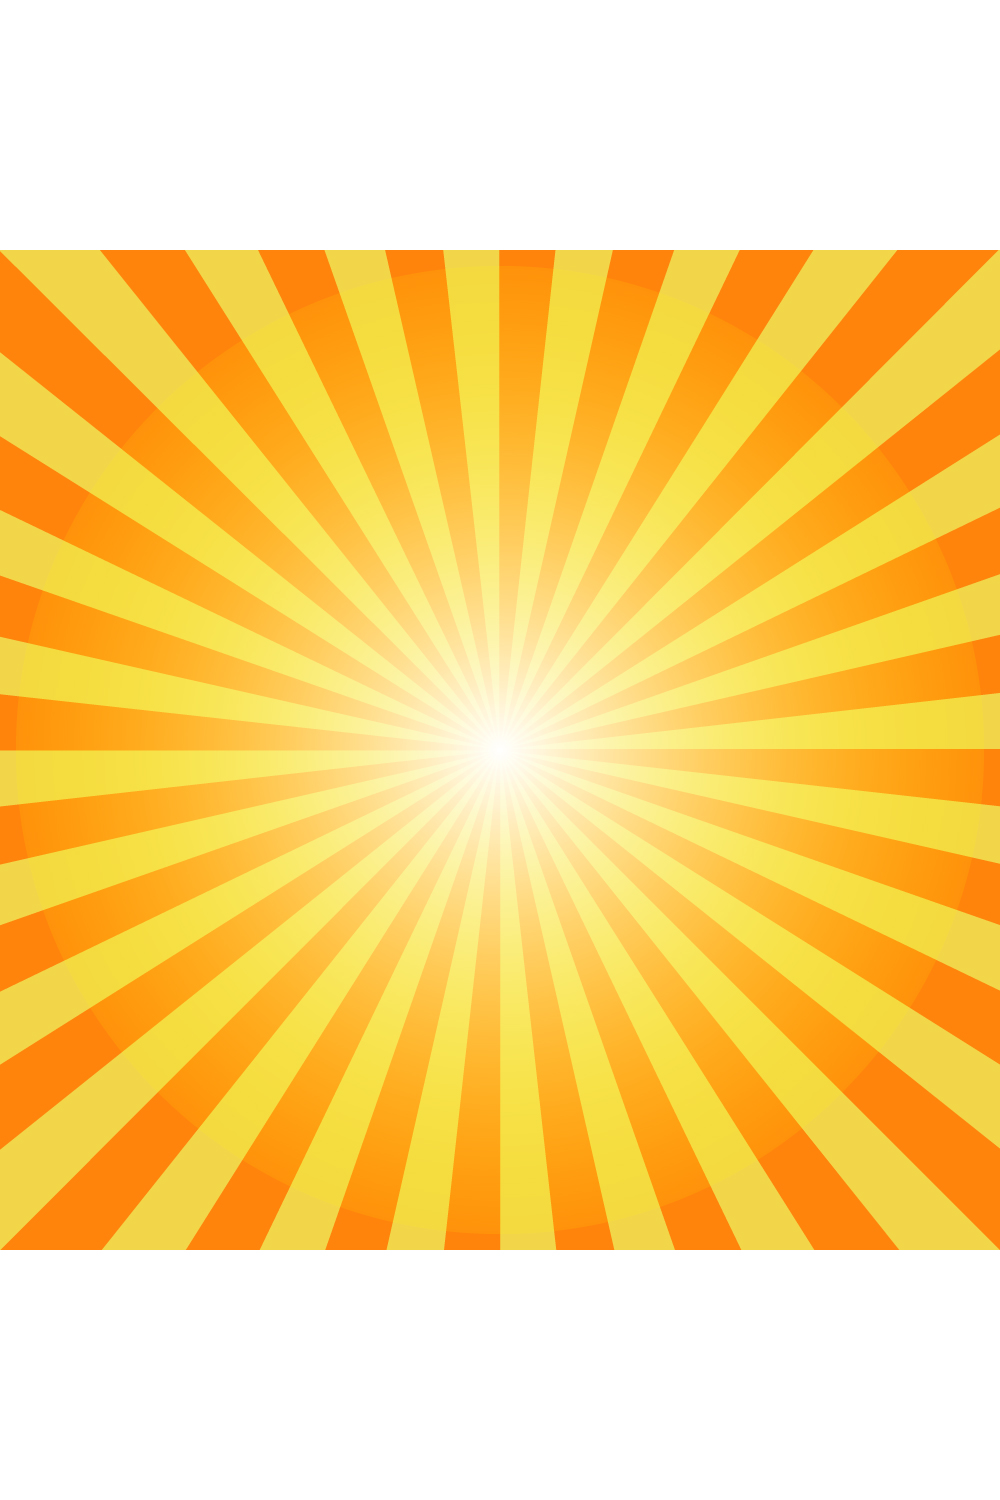 Yellow Abstract Sun Burst Background pinterest preview image.